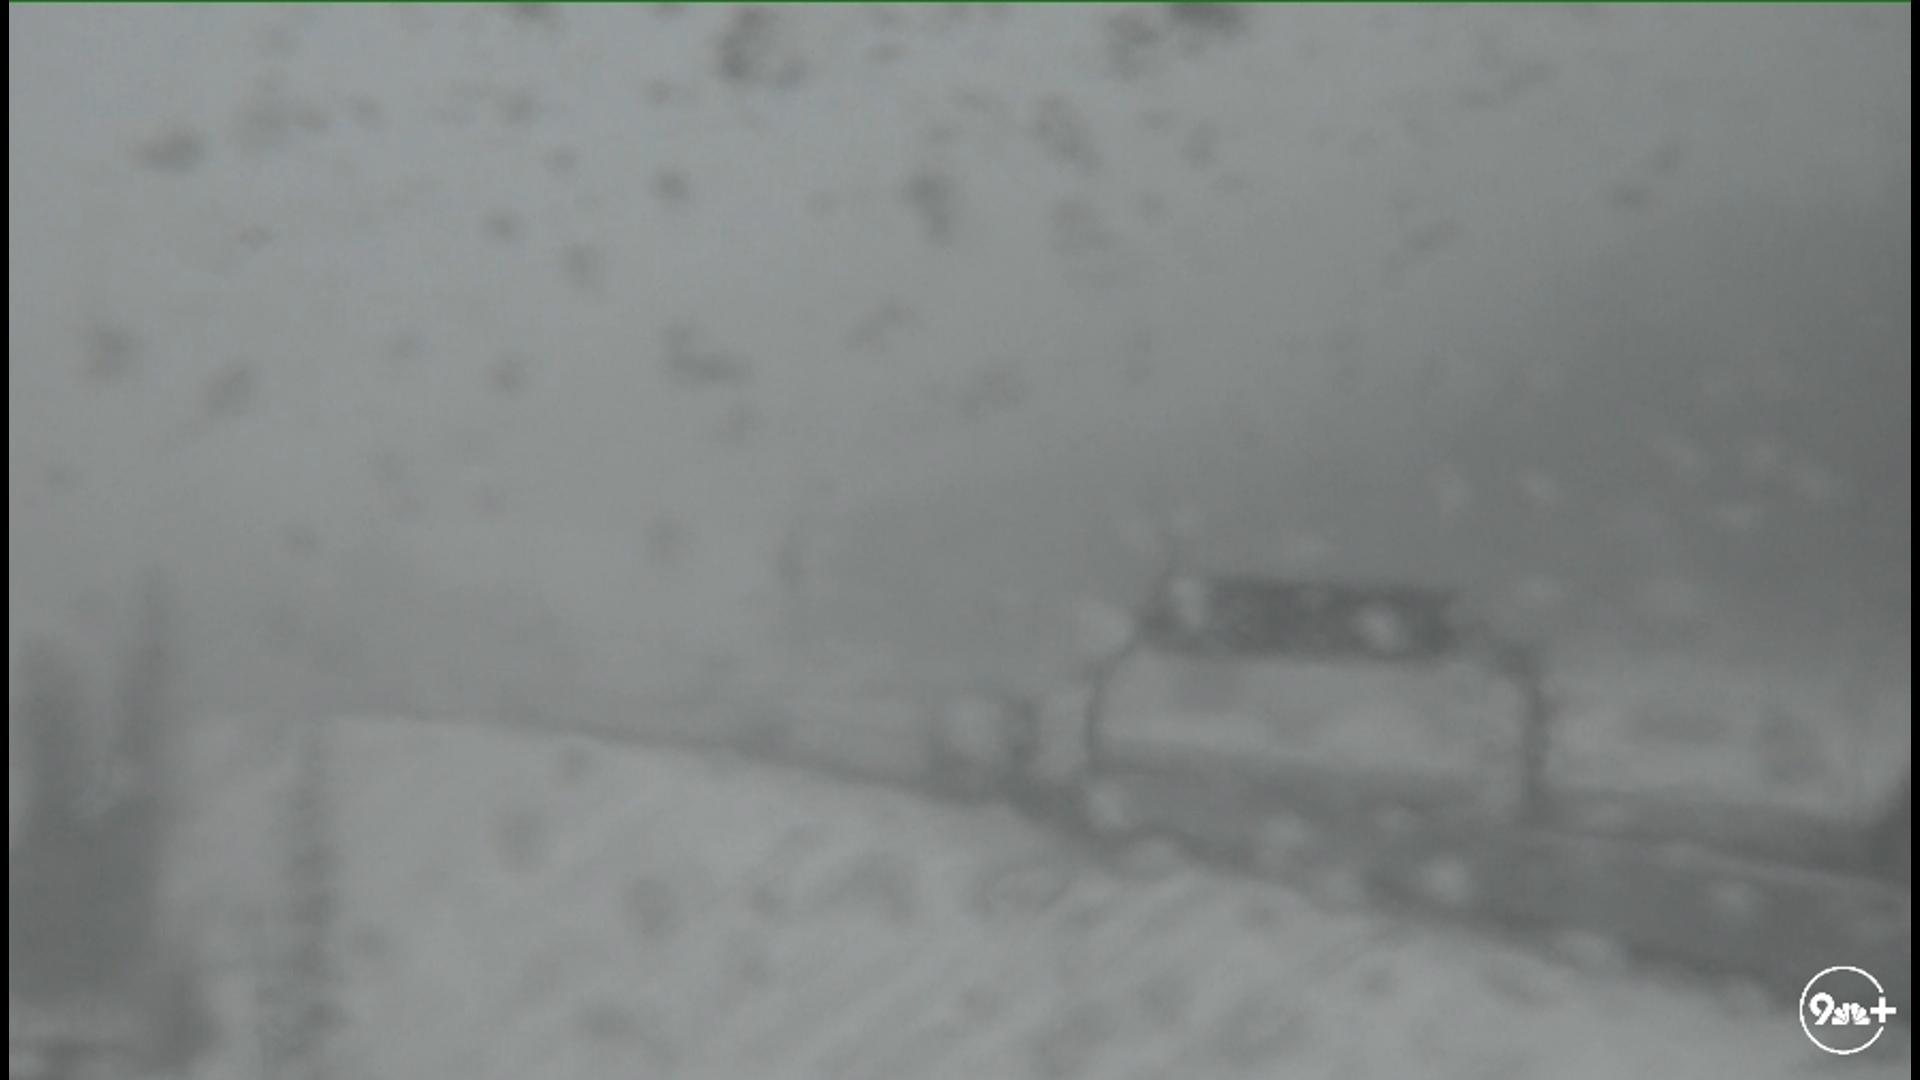 A live look at snowy conditions Monday at the Eisenhower Johnson Tunnels.